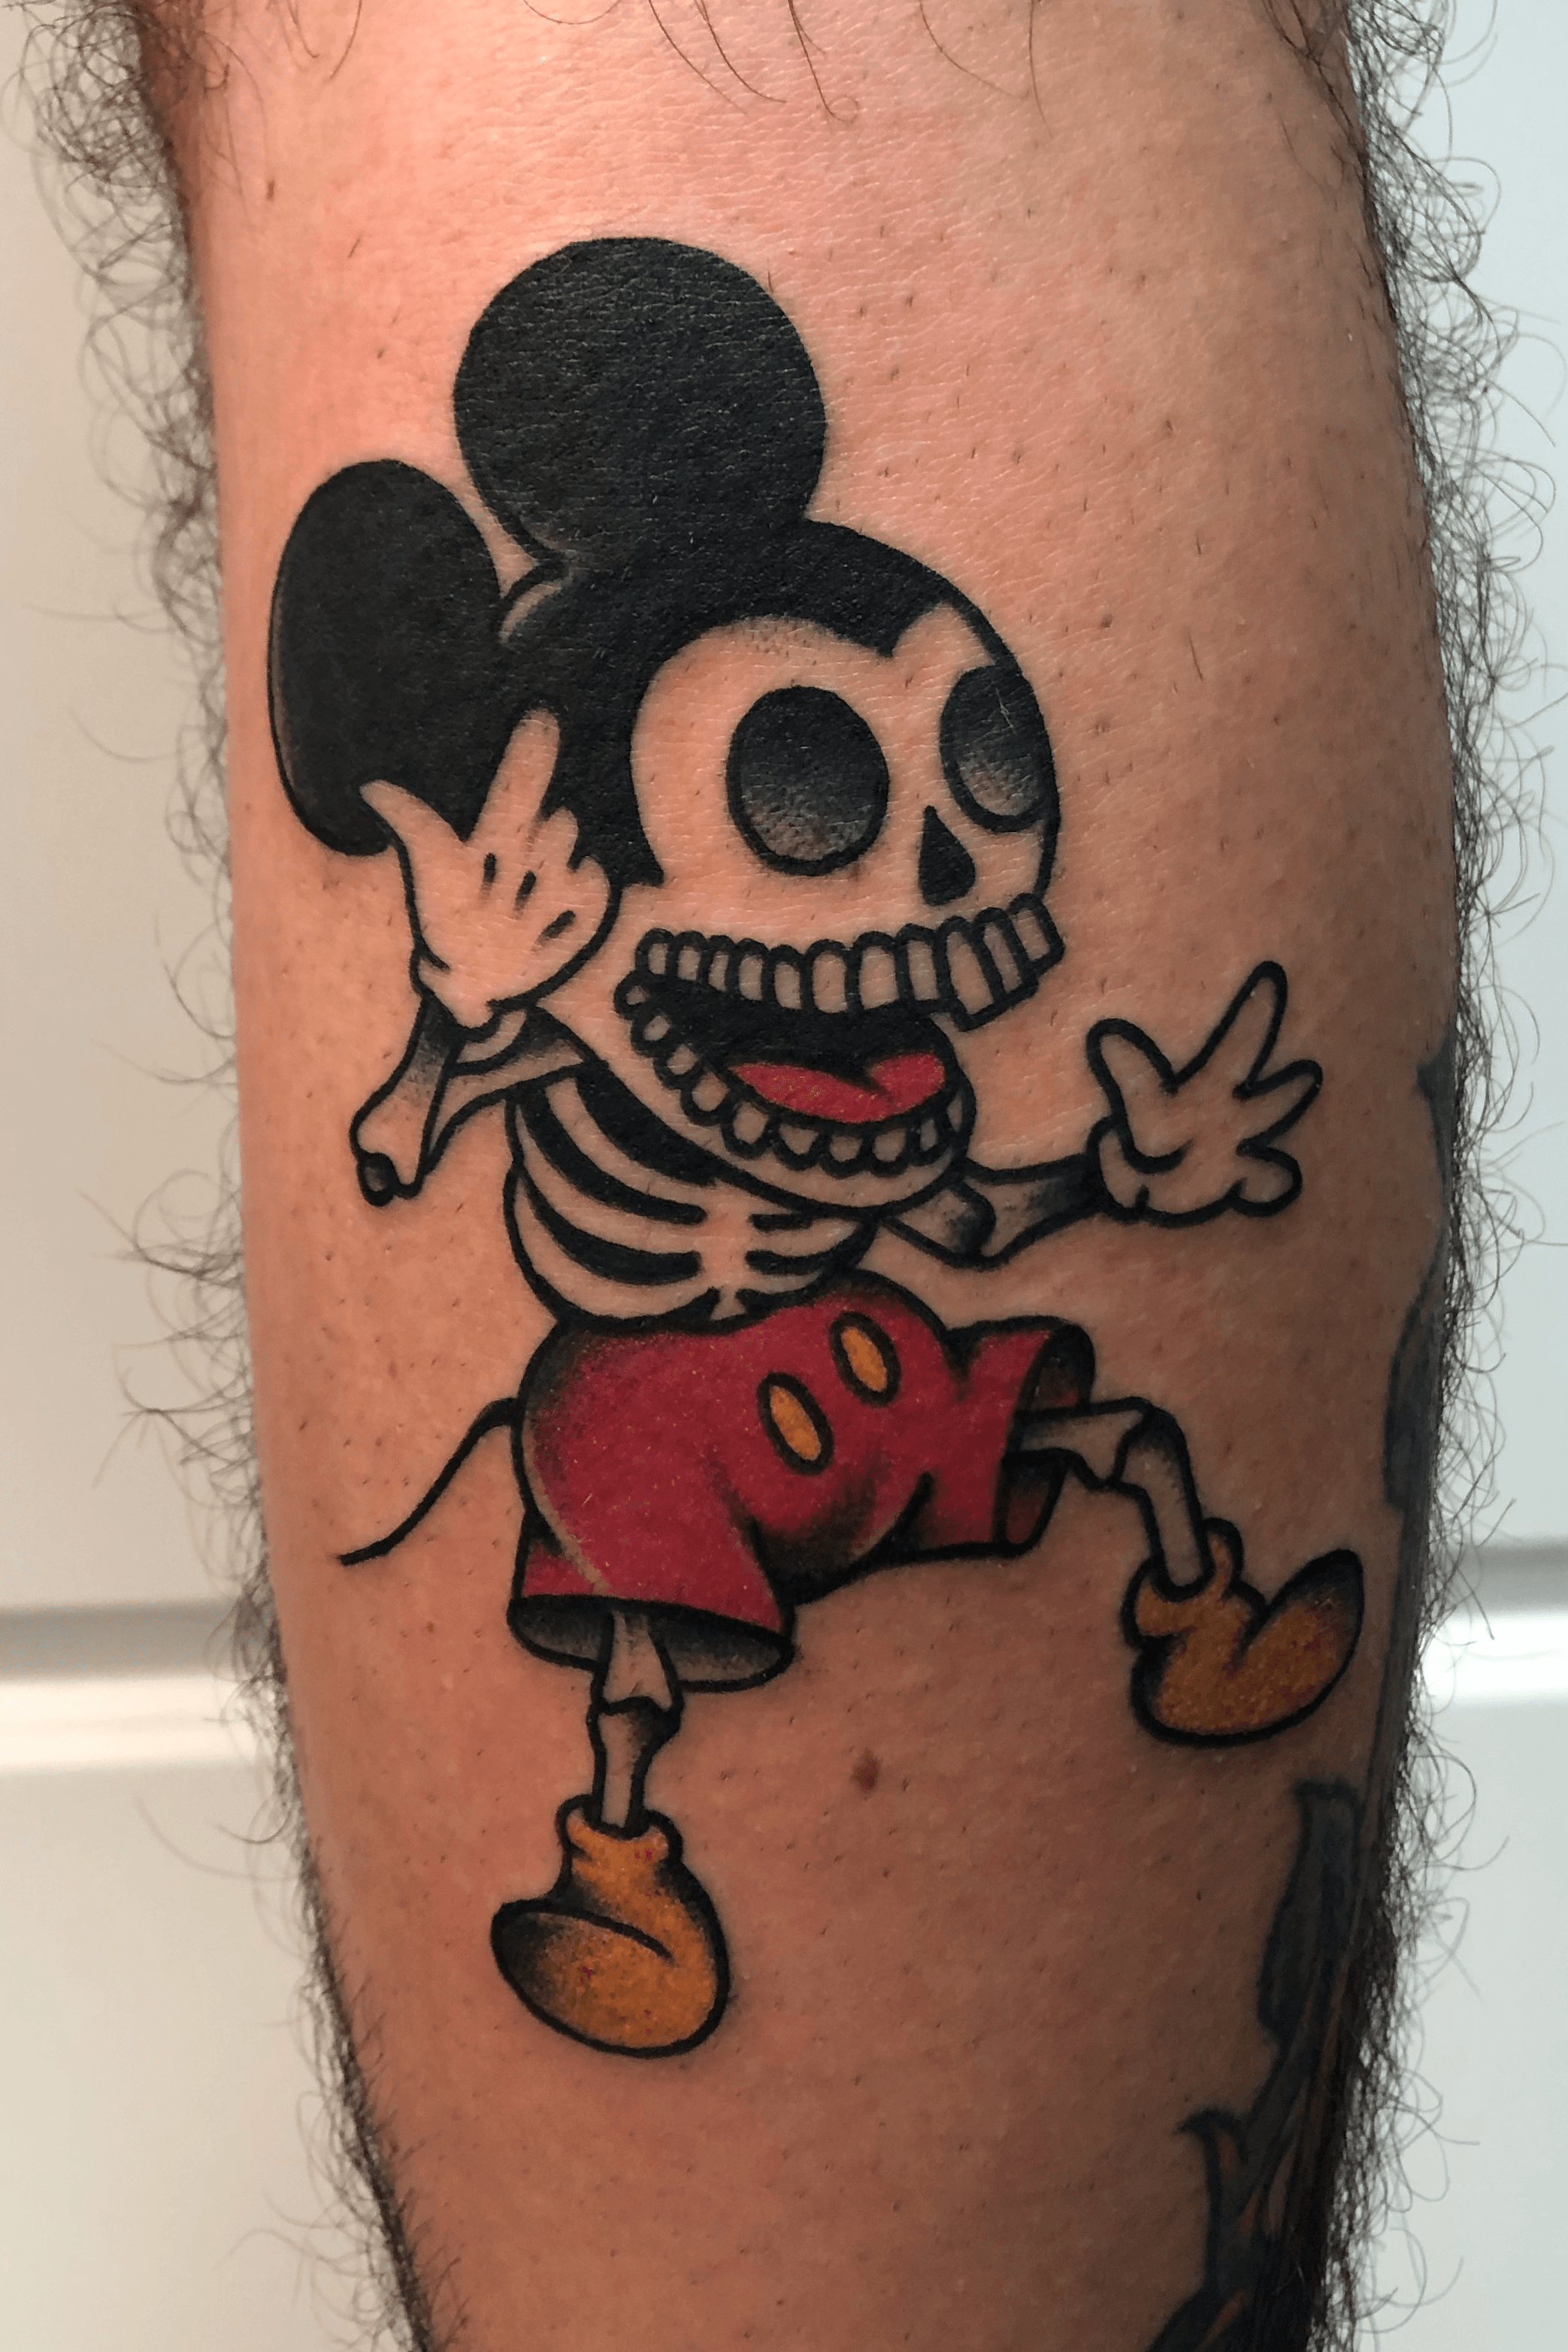 Tattoo made by Fade to Grey Tattoo at INKsearch